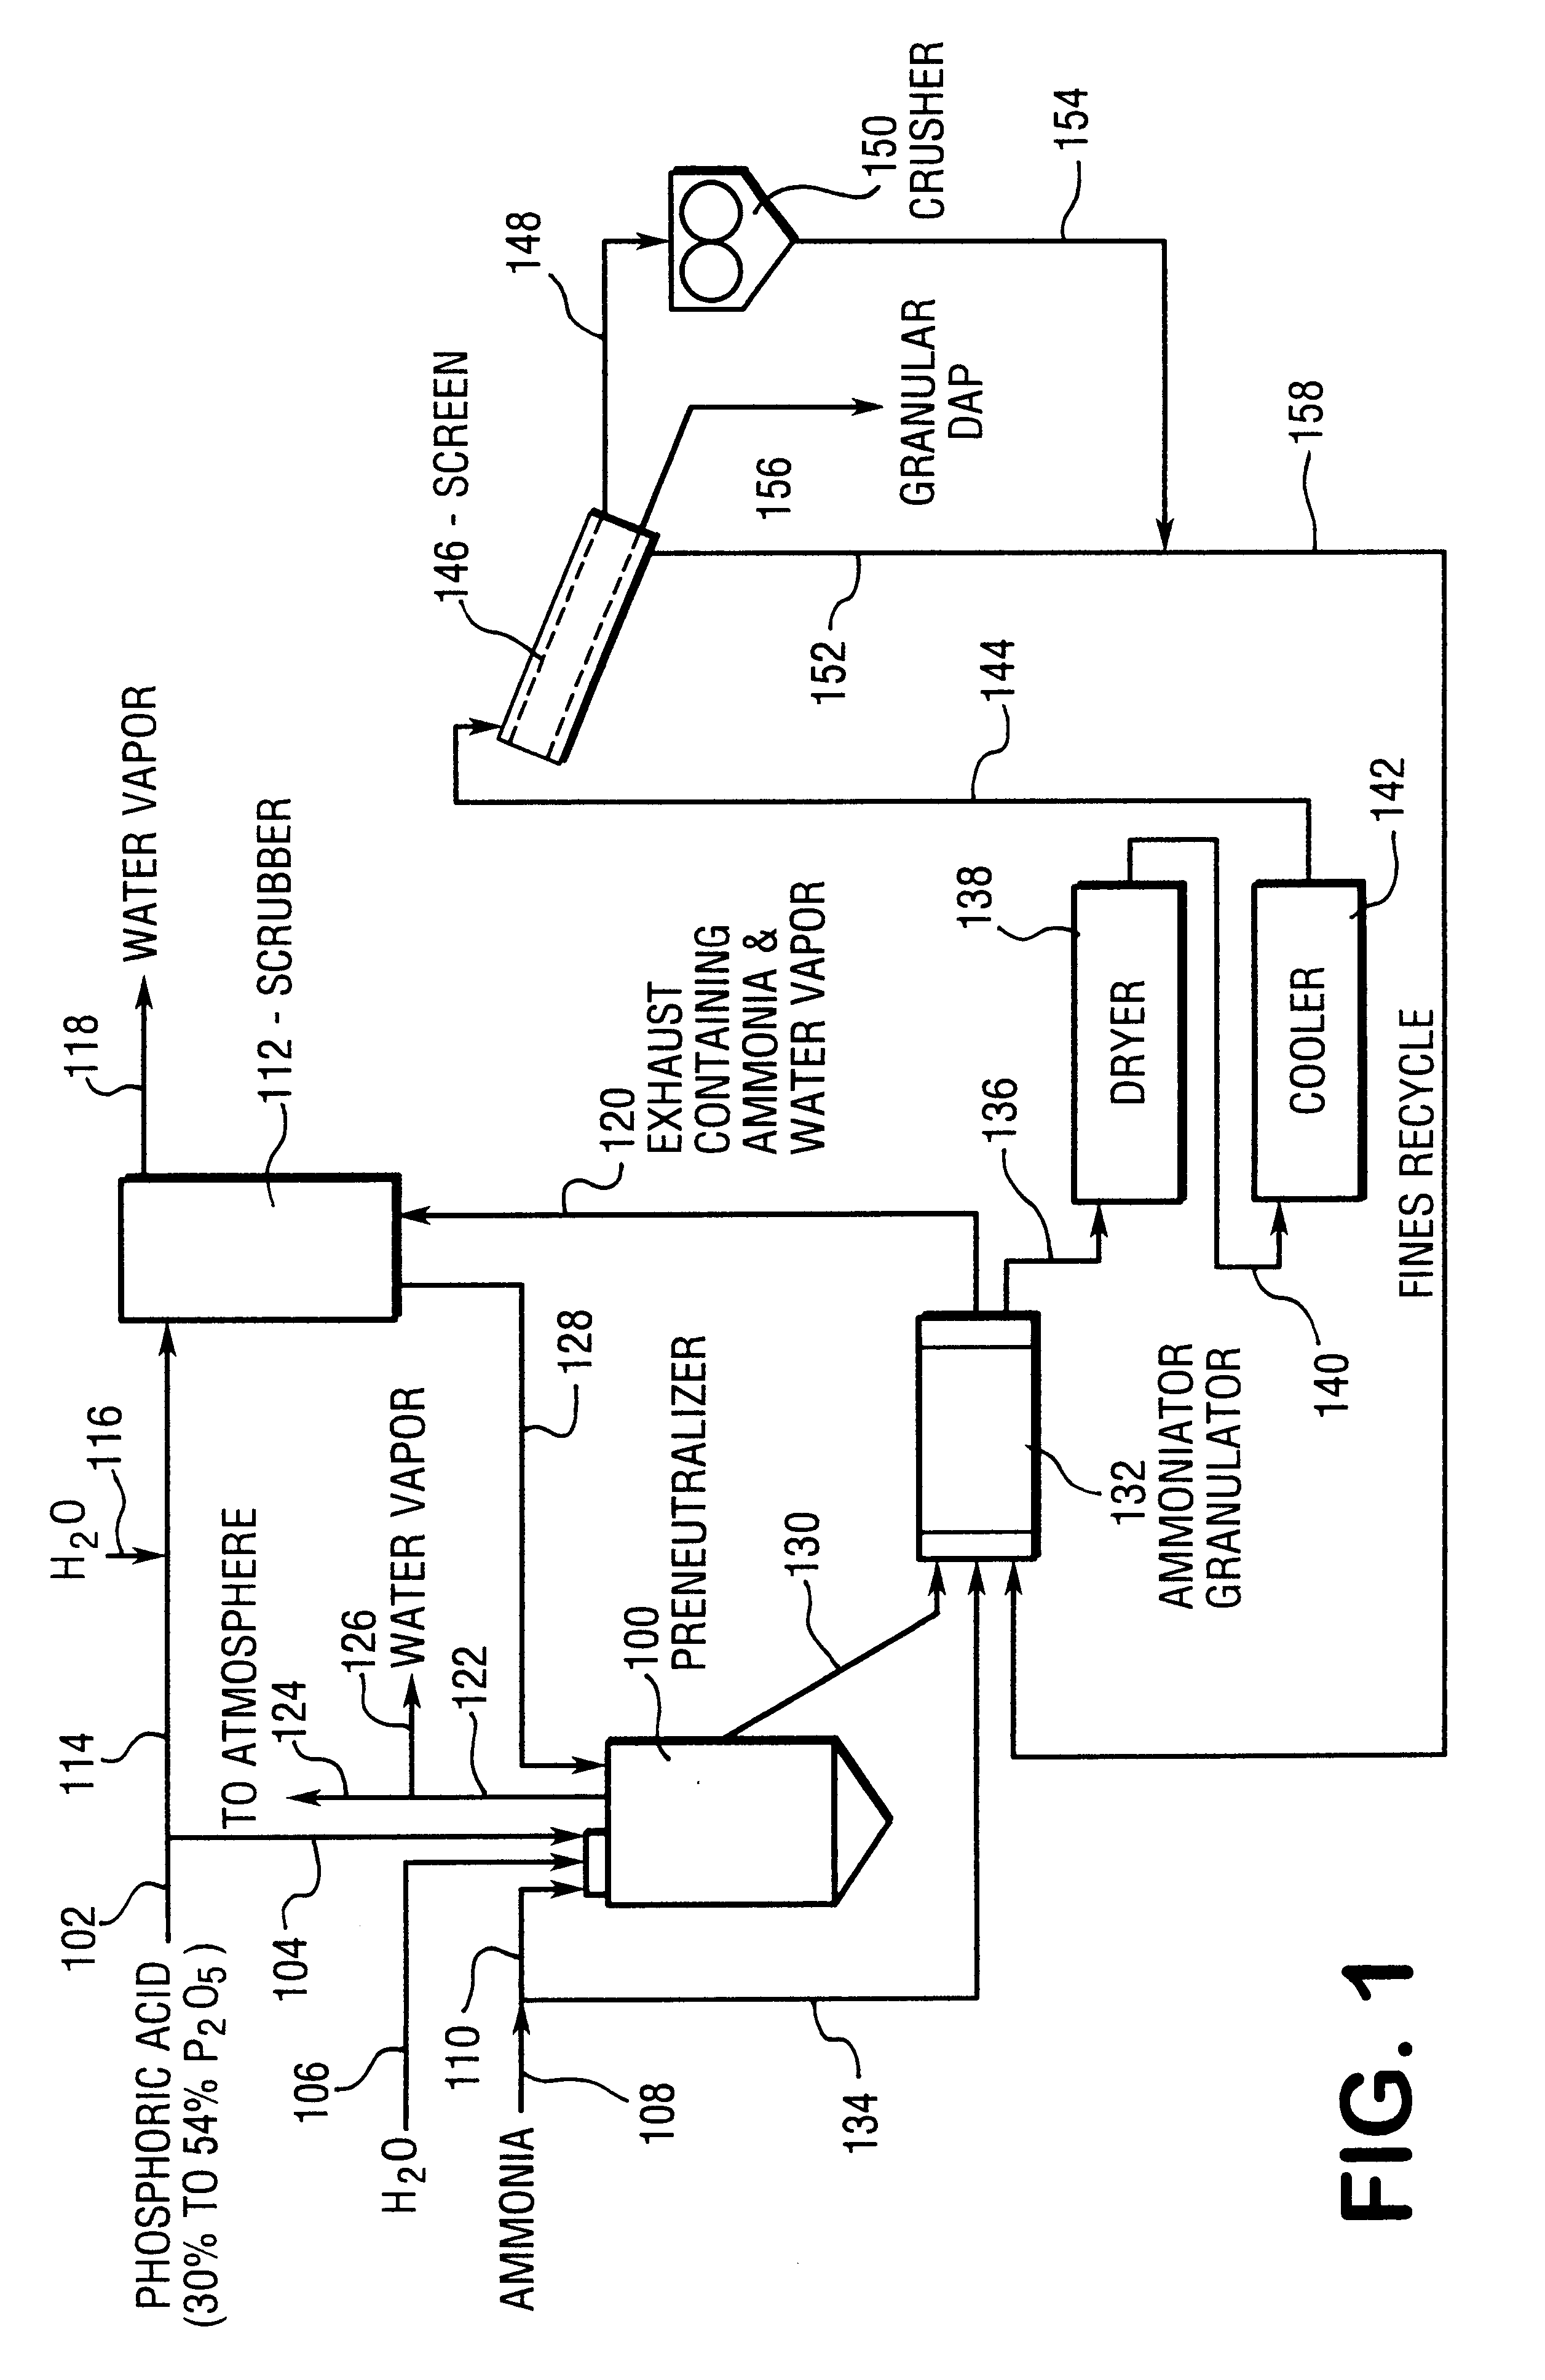 Method for producing fertilizer grade DAP having an increased nitrogen concentration from recycle